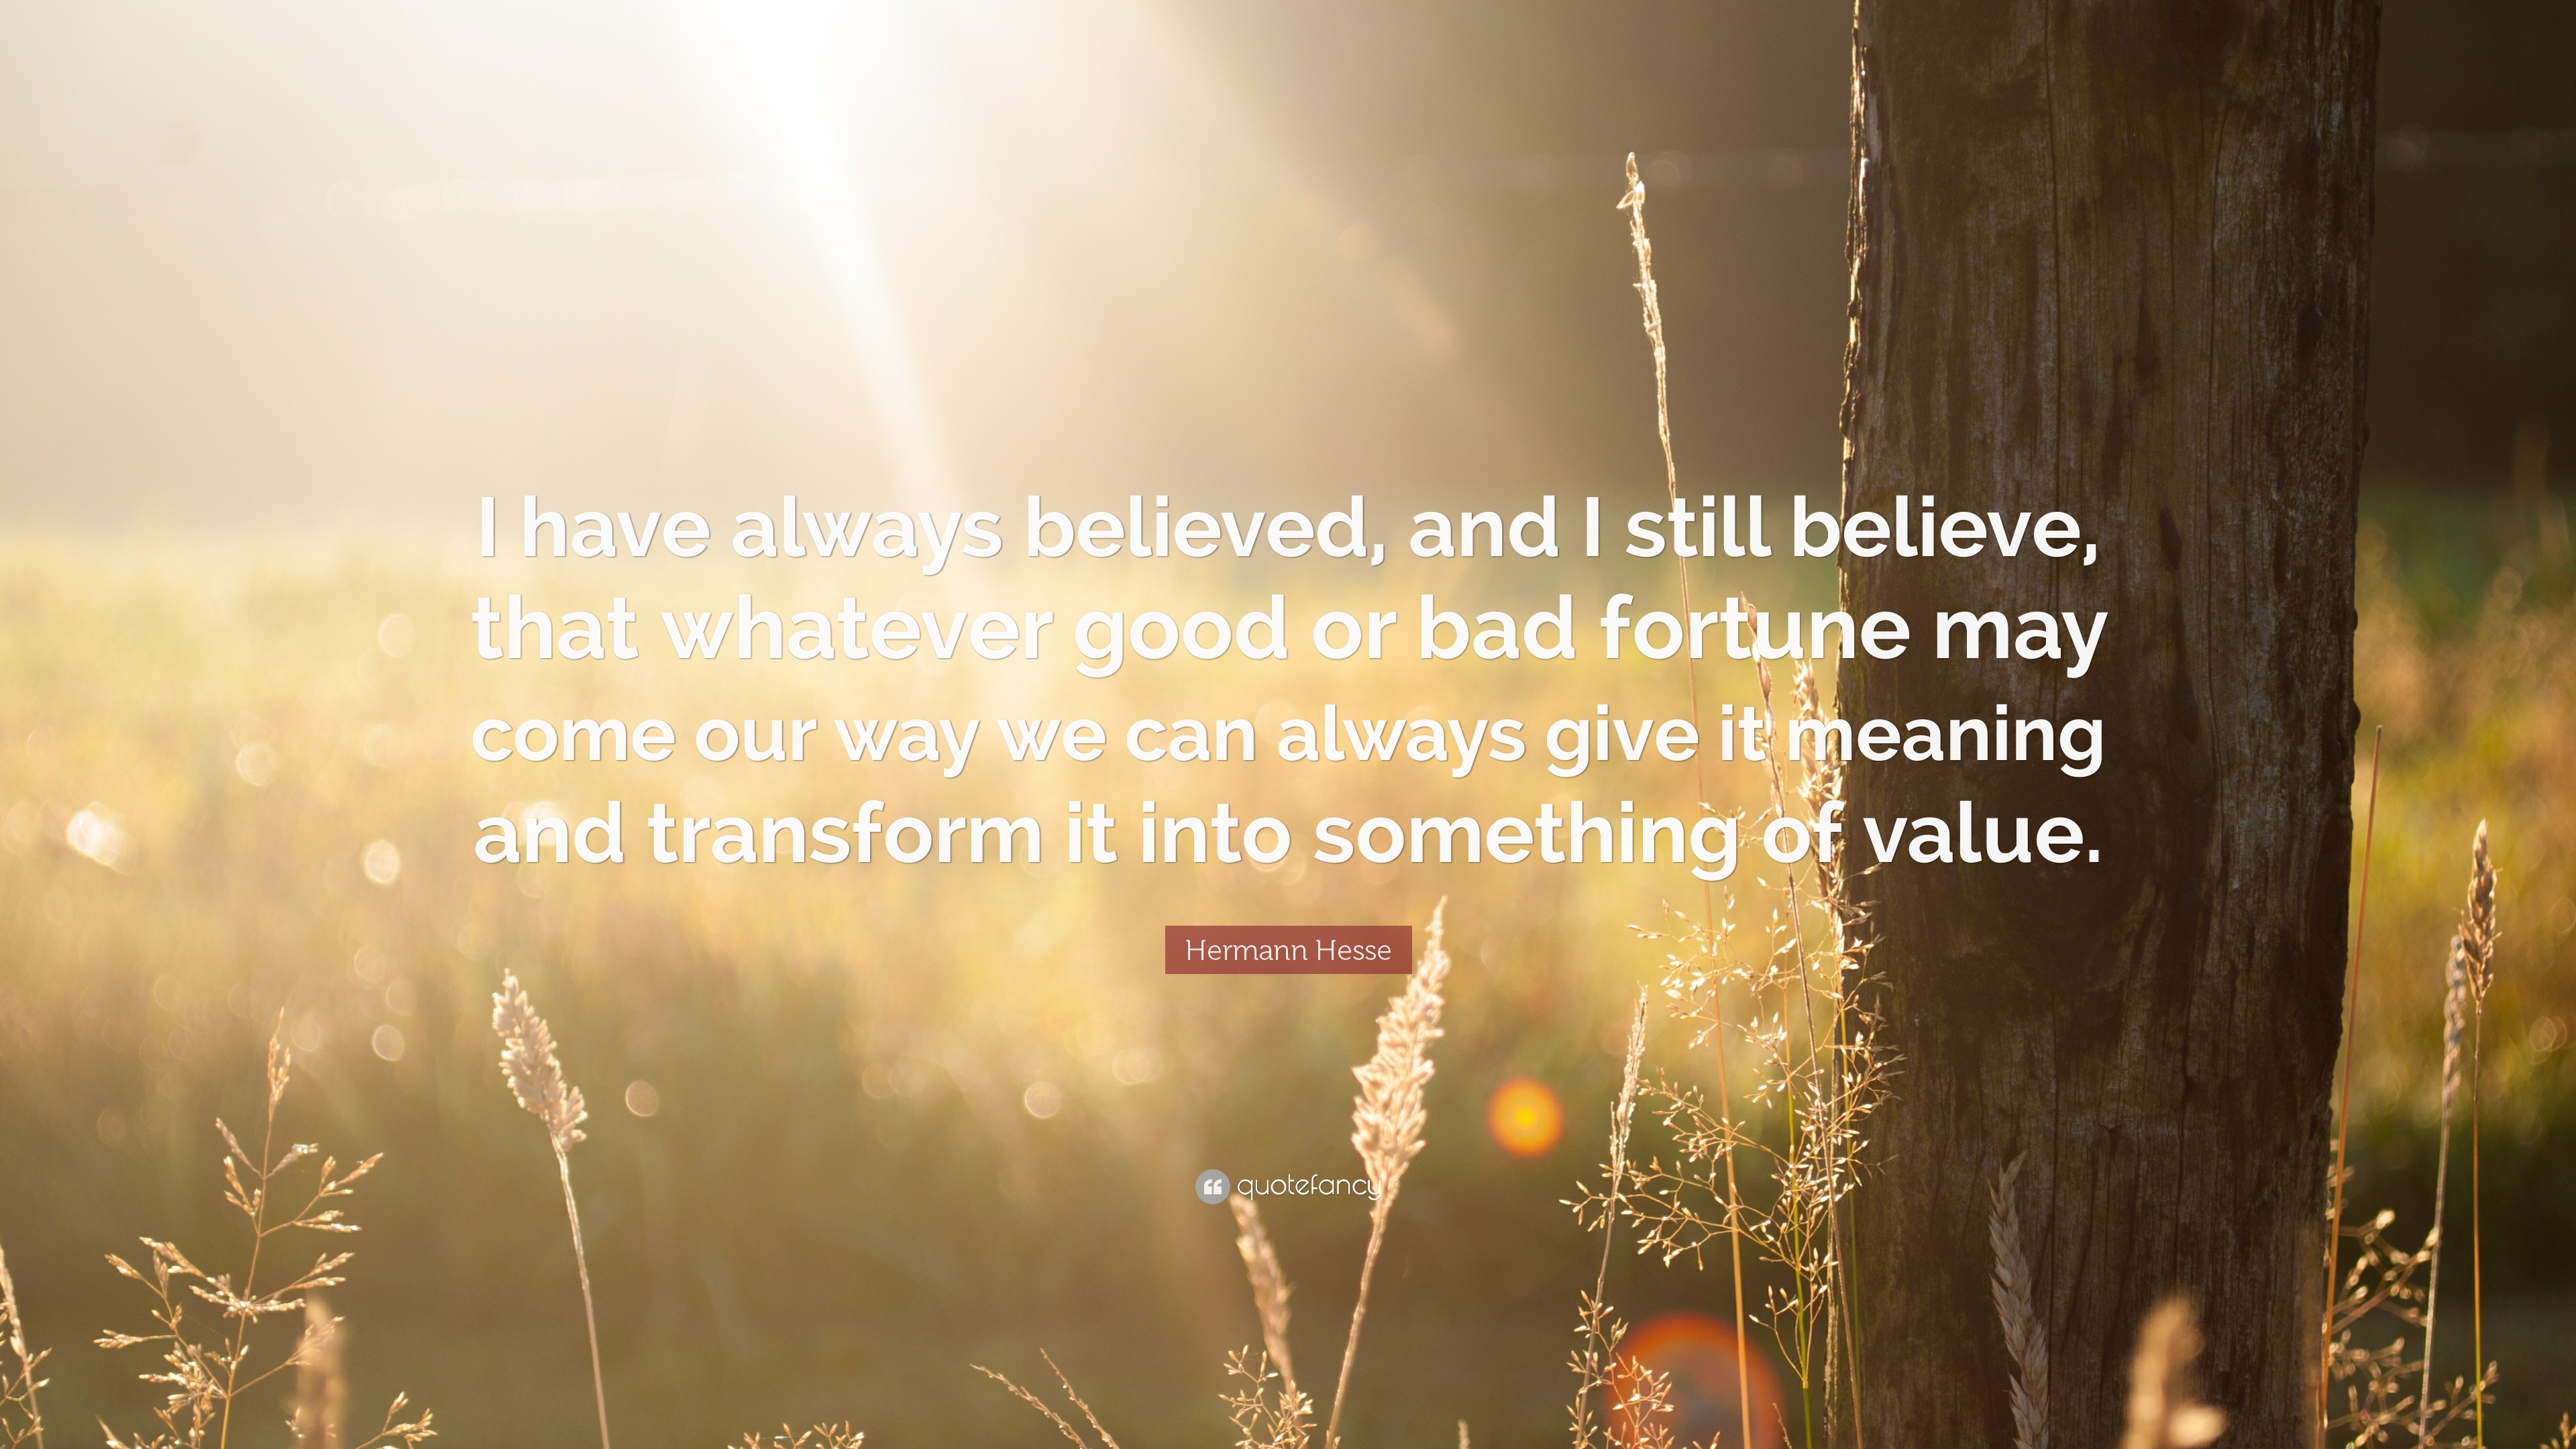 Hermann Hesse Quote: “I have always believed, and I still believe, that ...